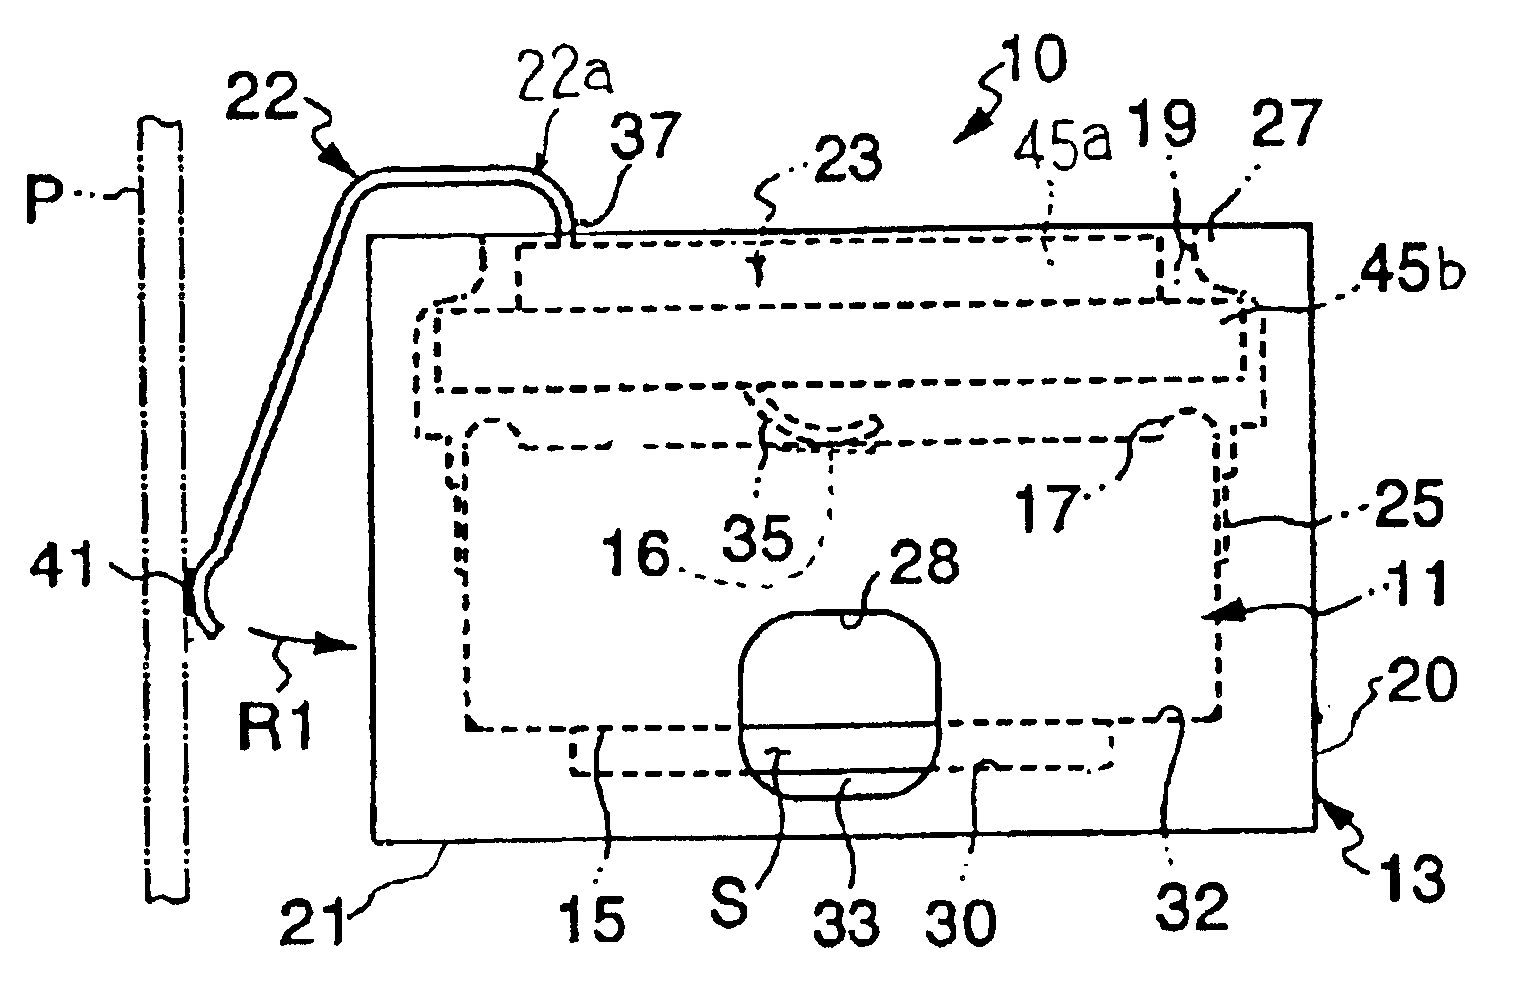 Microphone holder having connector unit molded together with conductive strips